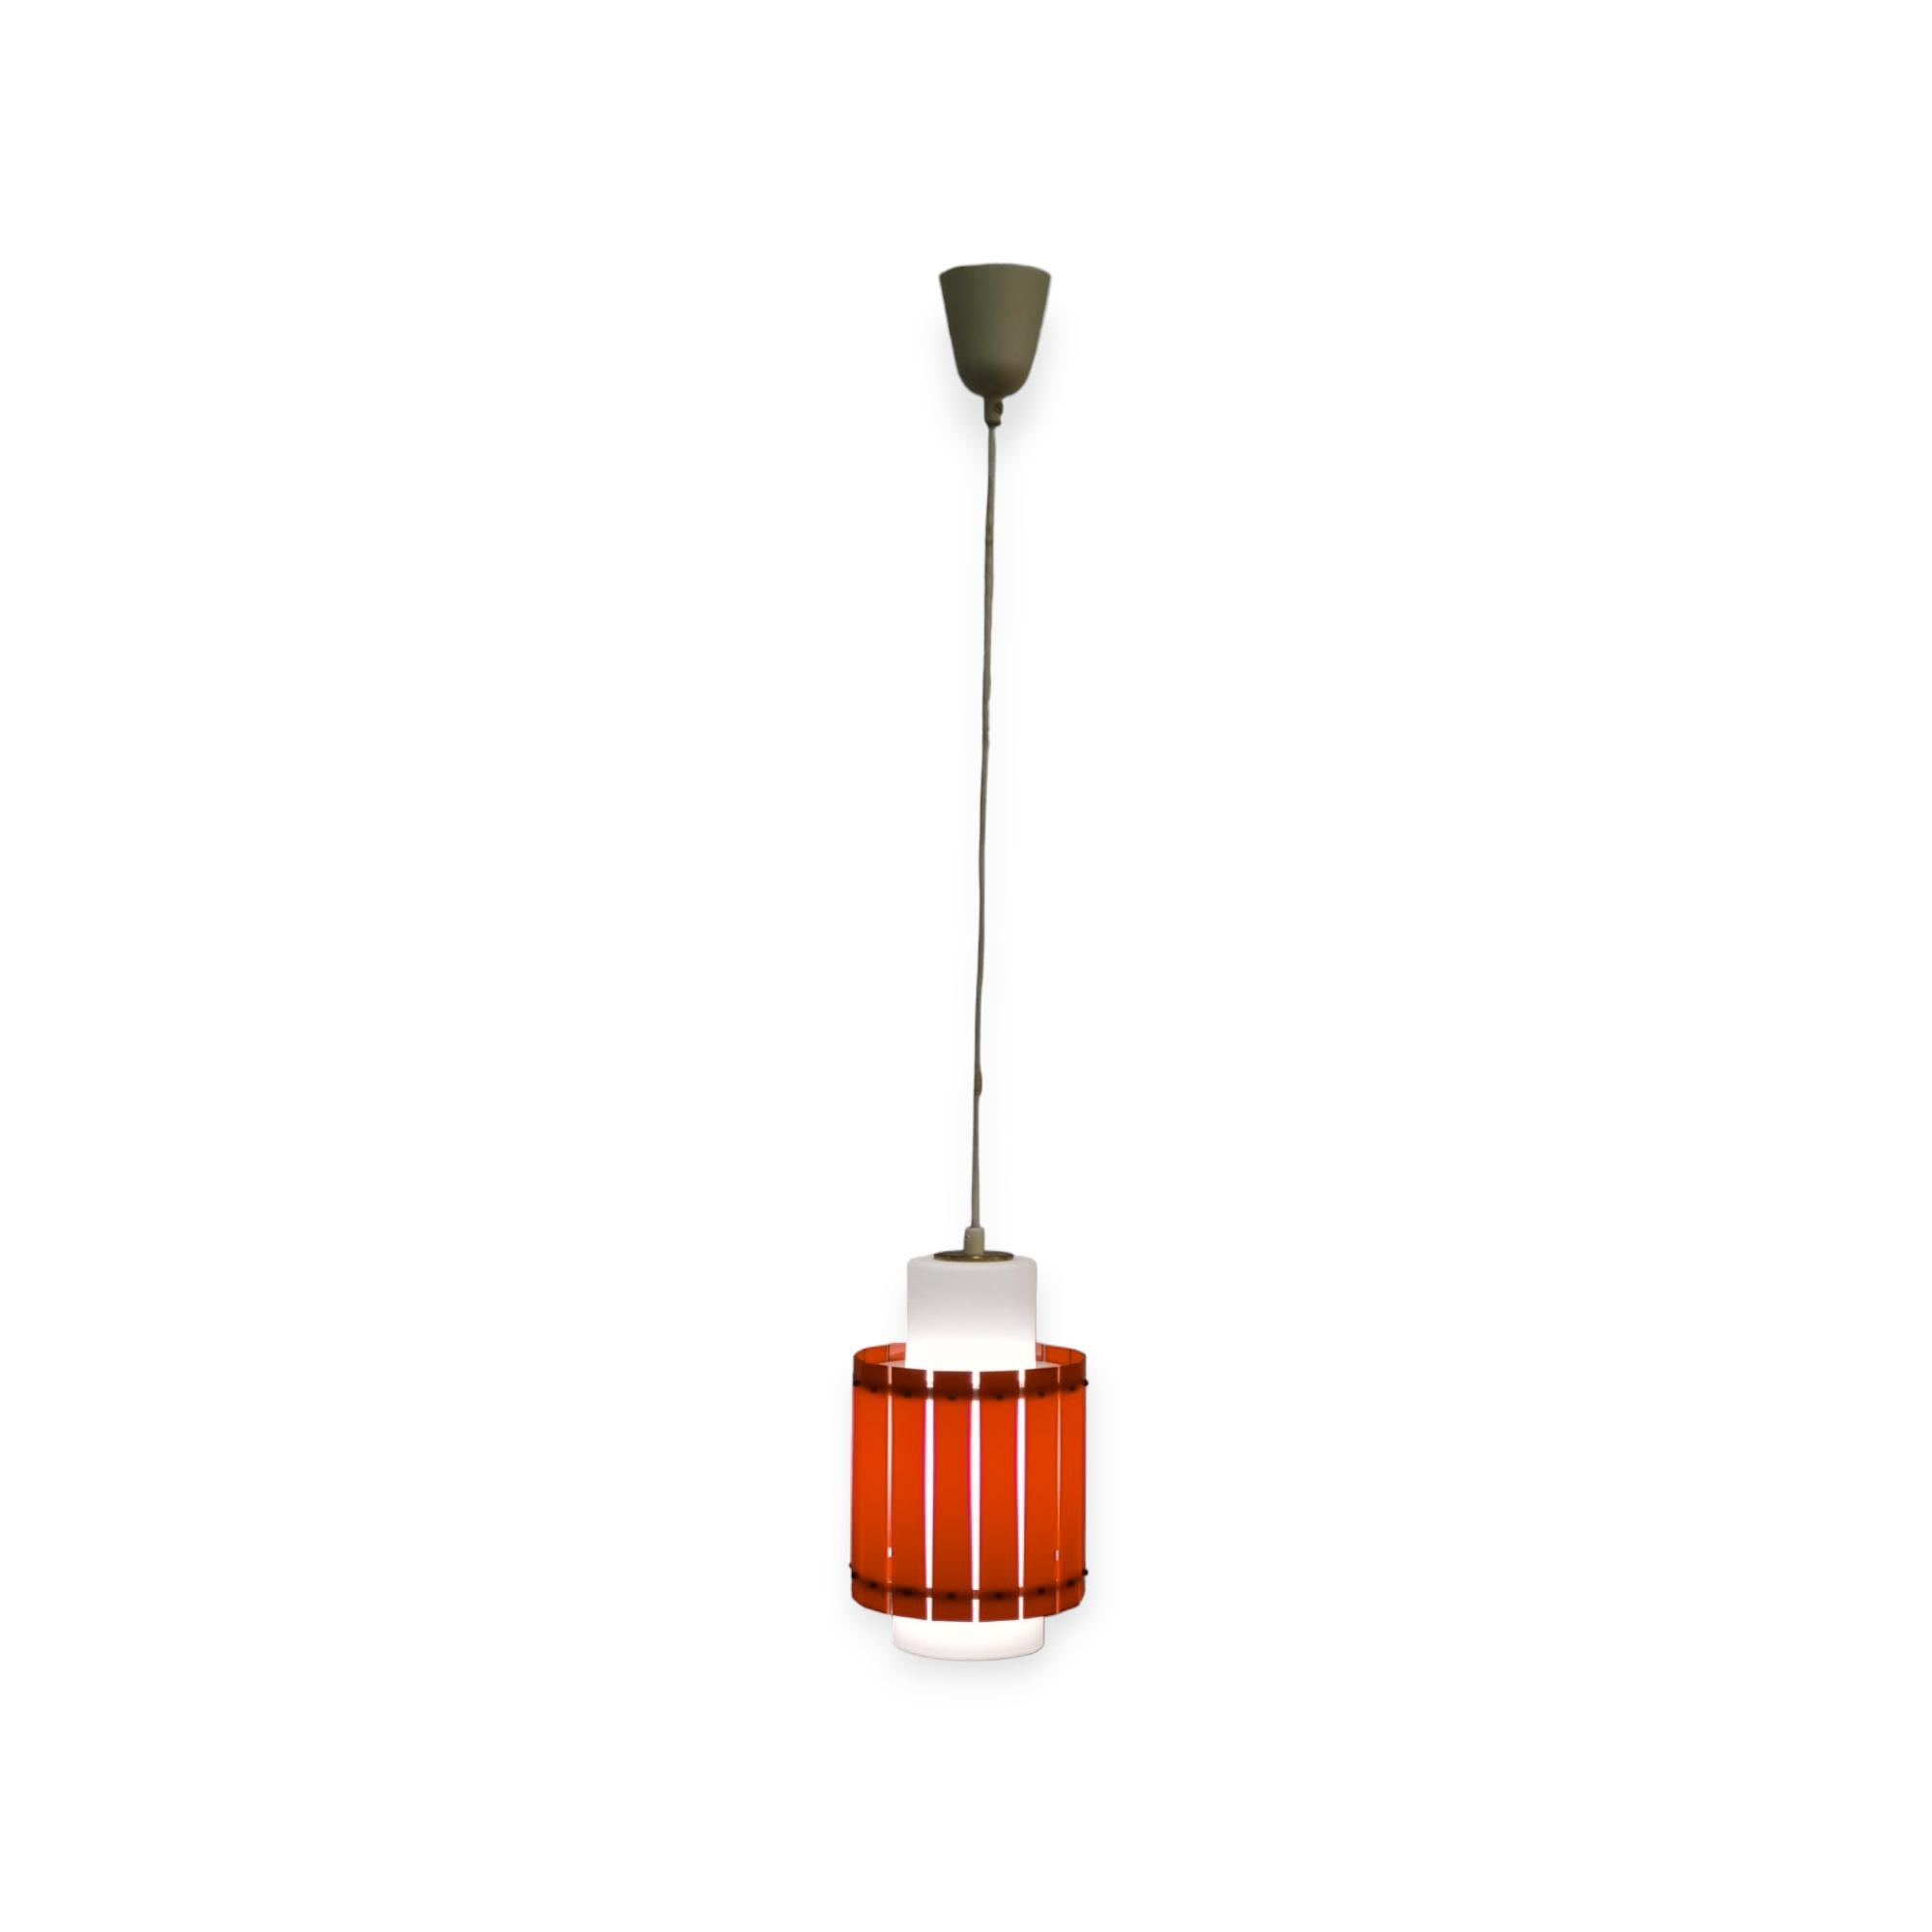 A cheerful and colourful ceiling pendant by Maria Lindeman for Idman. Already designed in the late 1950s and featured in the 1961 Idman catalogue, this lamp combines a frosted glass shade with a hard plastic outer shade that makes it all more